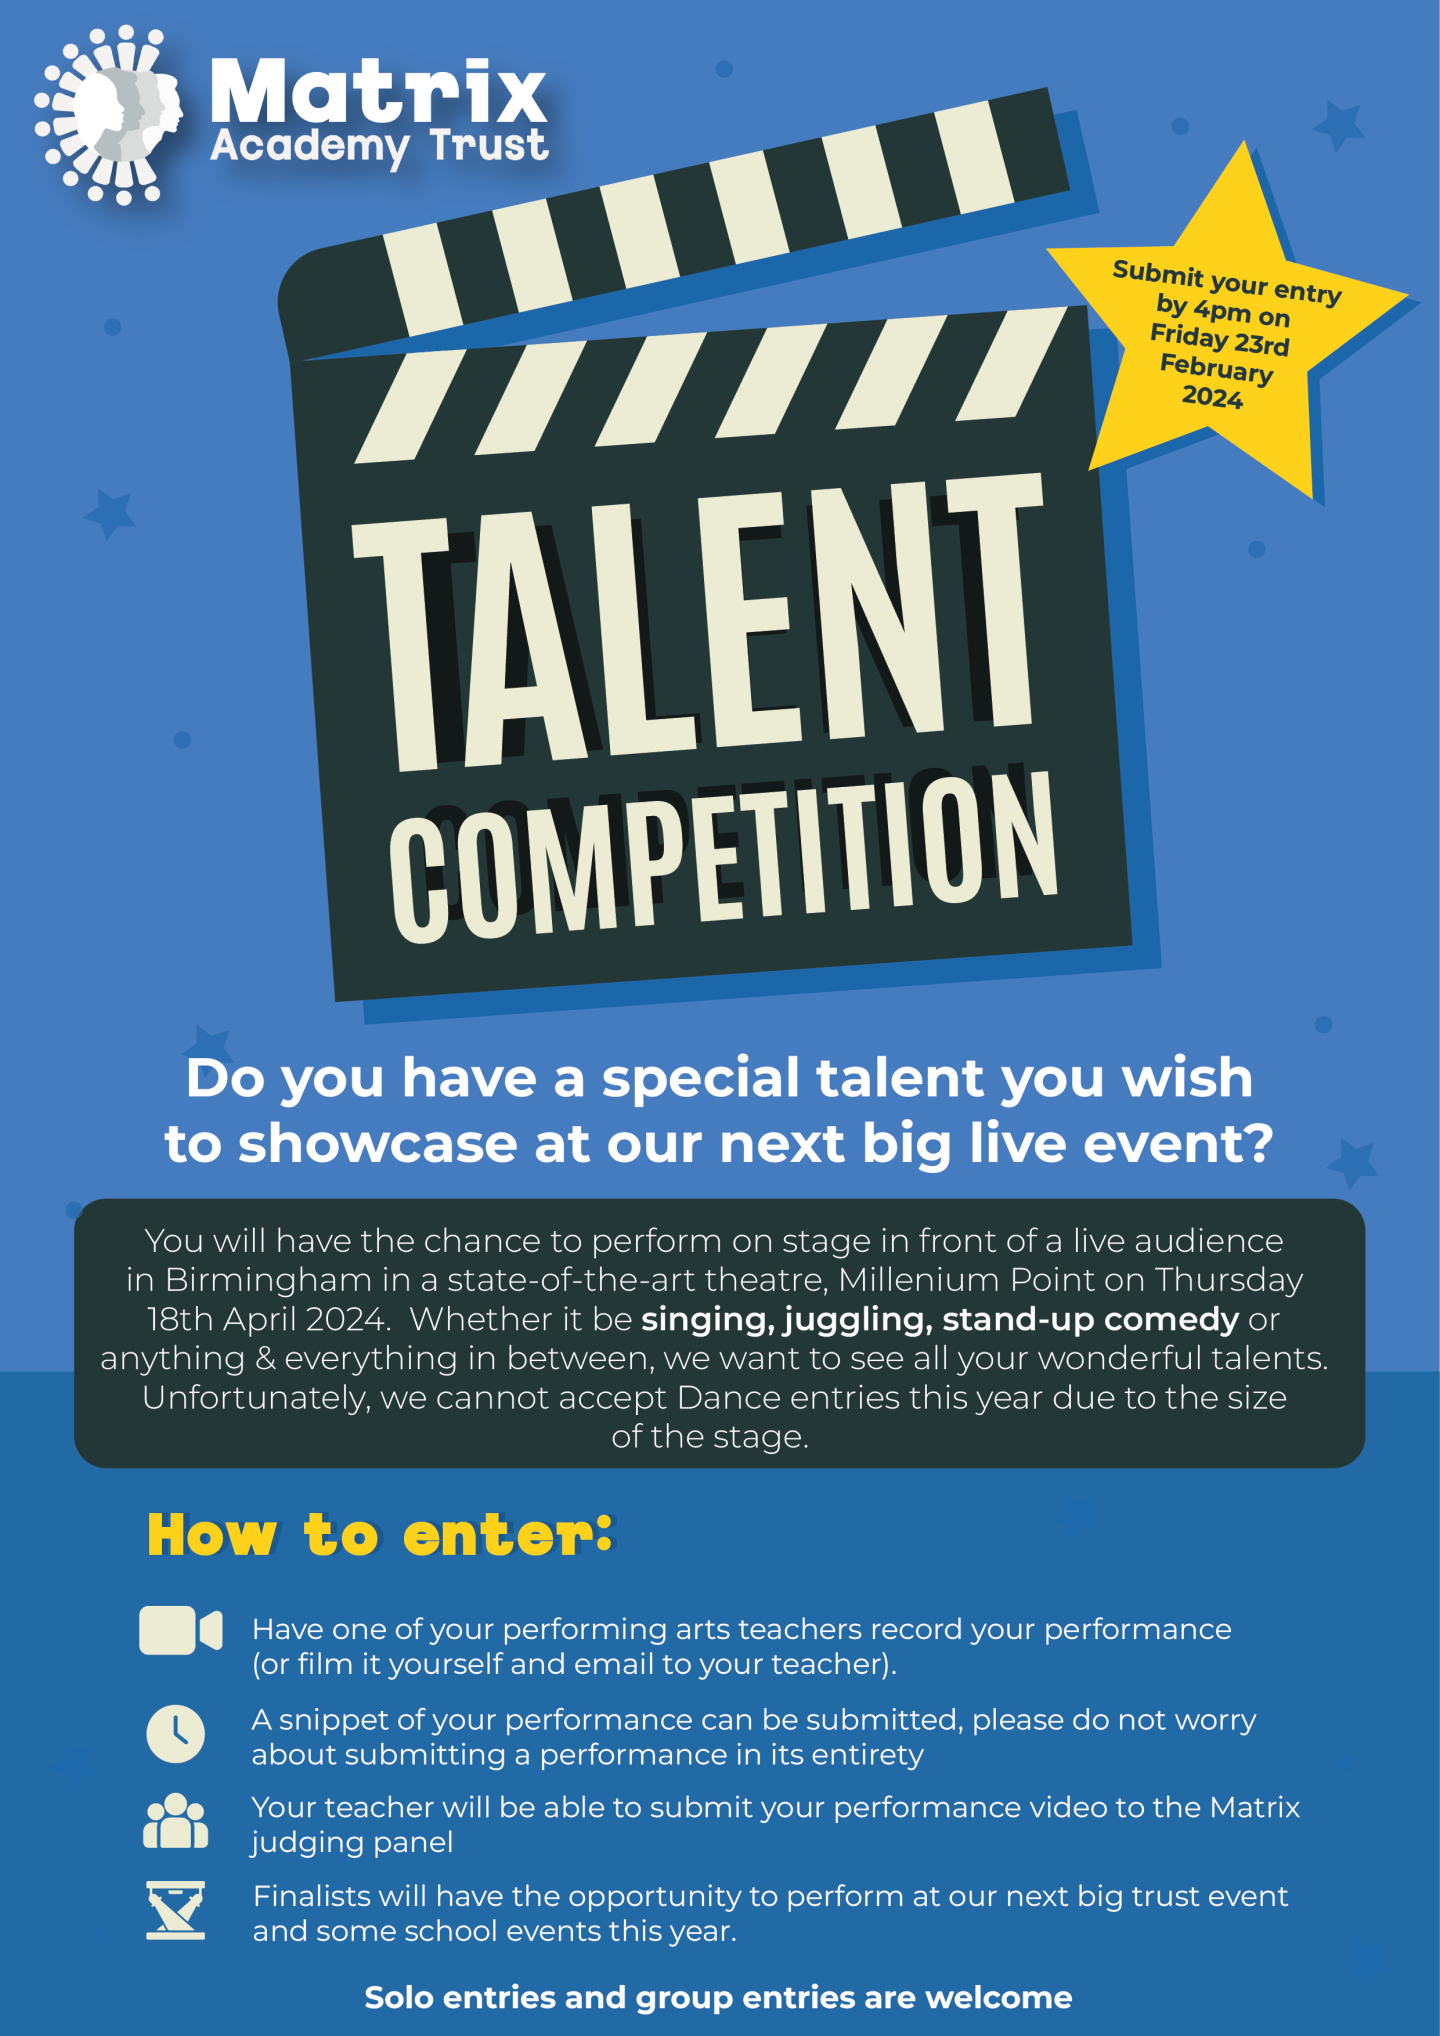 Talent-competition